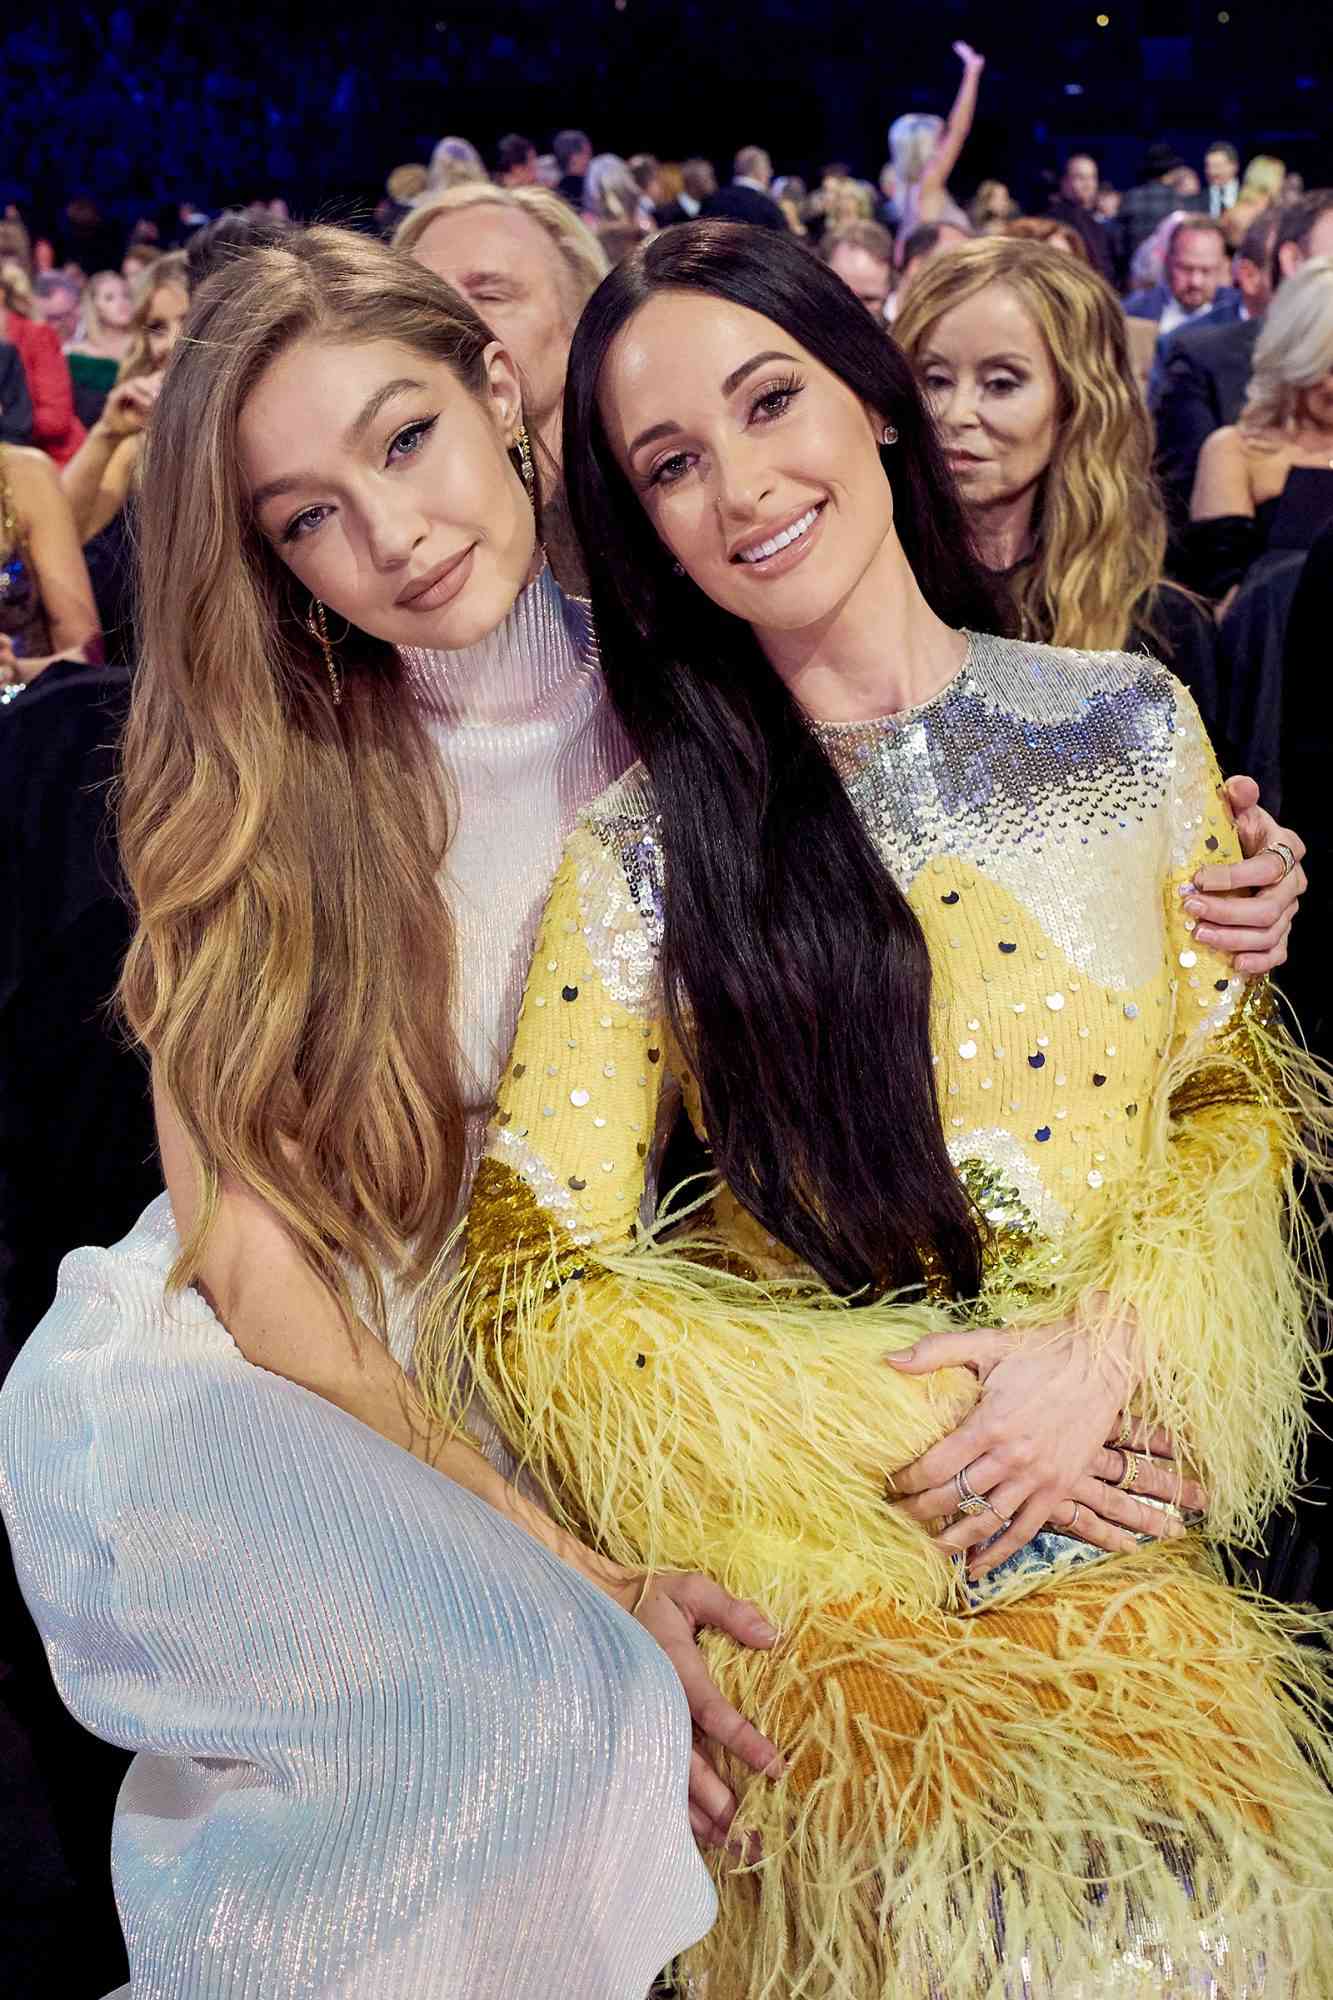 Gigi Hadid and Kacey Musgraves attend the 53rd annual CMA Awards at the Bridgestone Arena on November 13, 2019 in Nashville, Tennessee